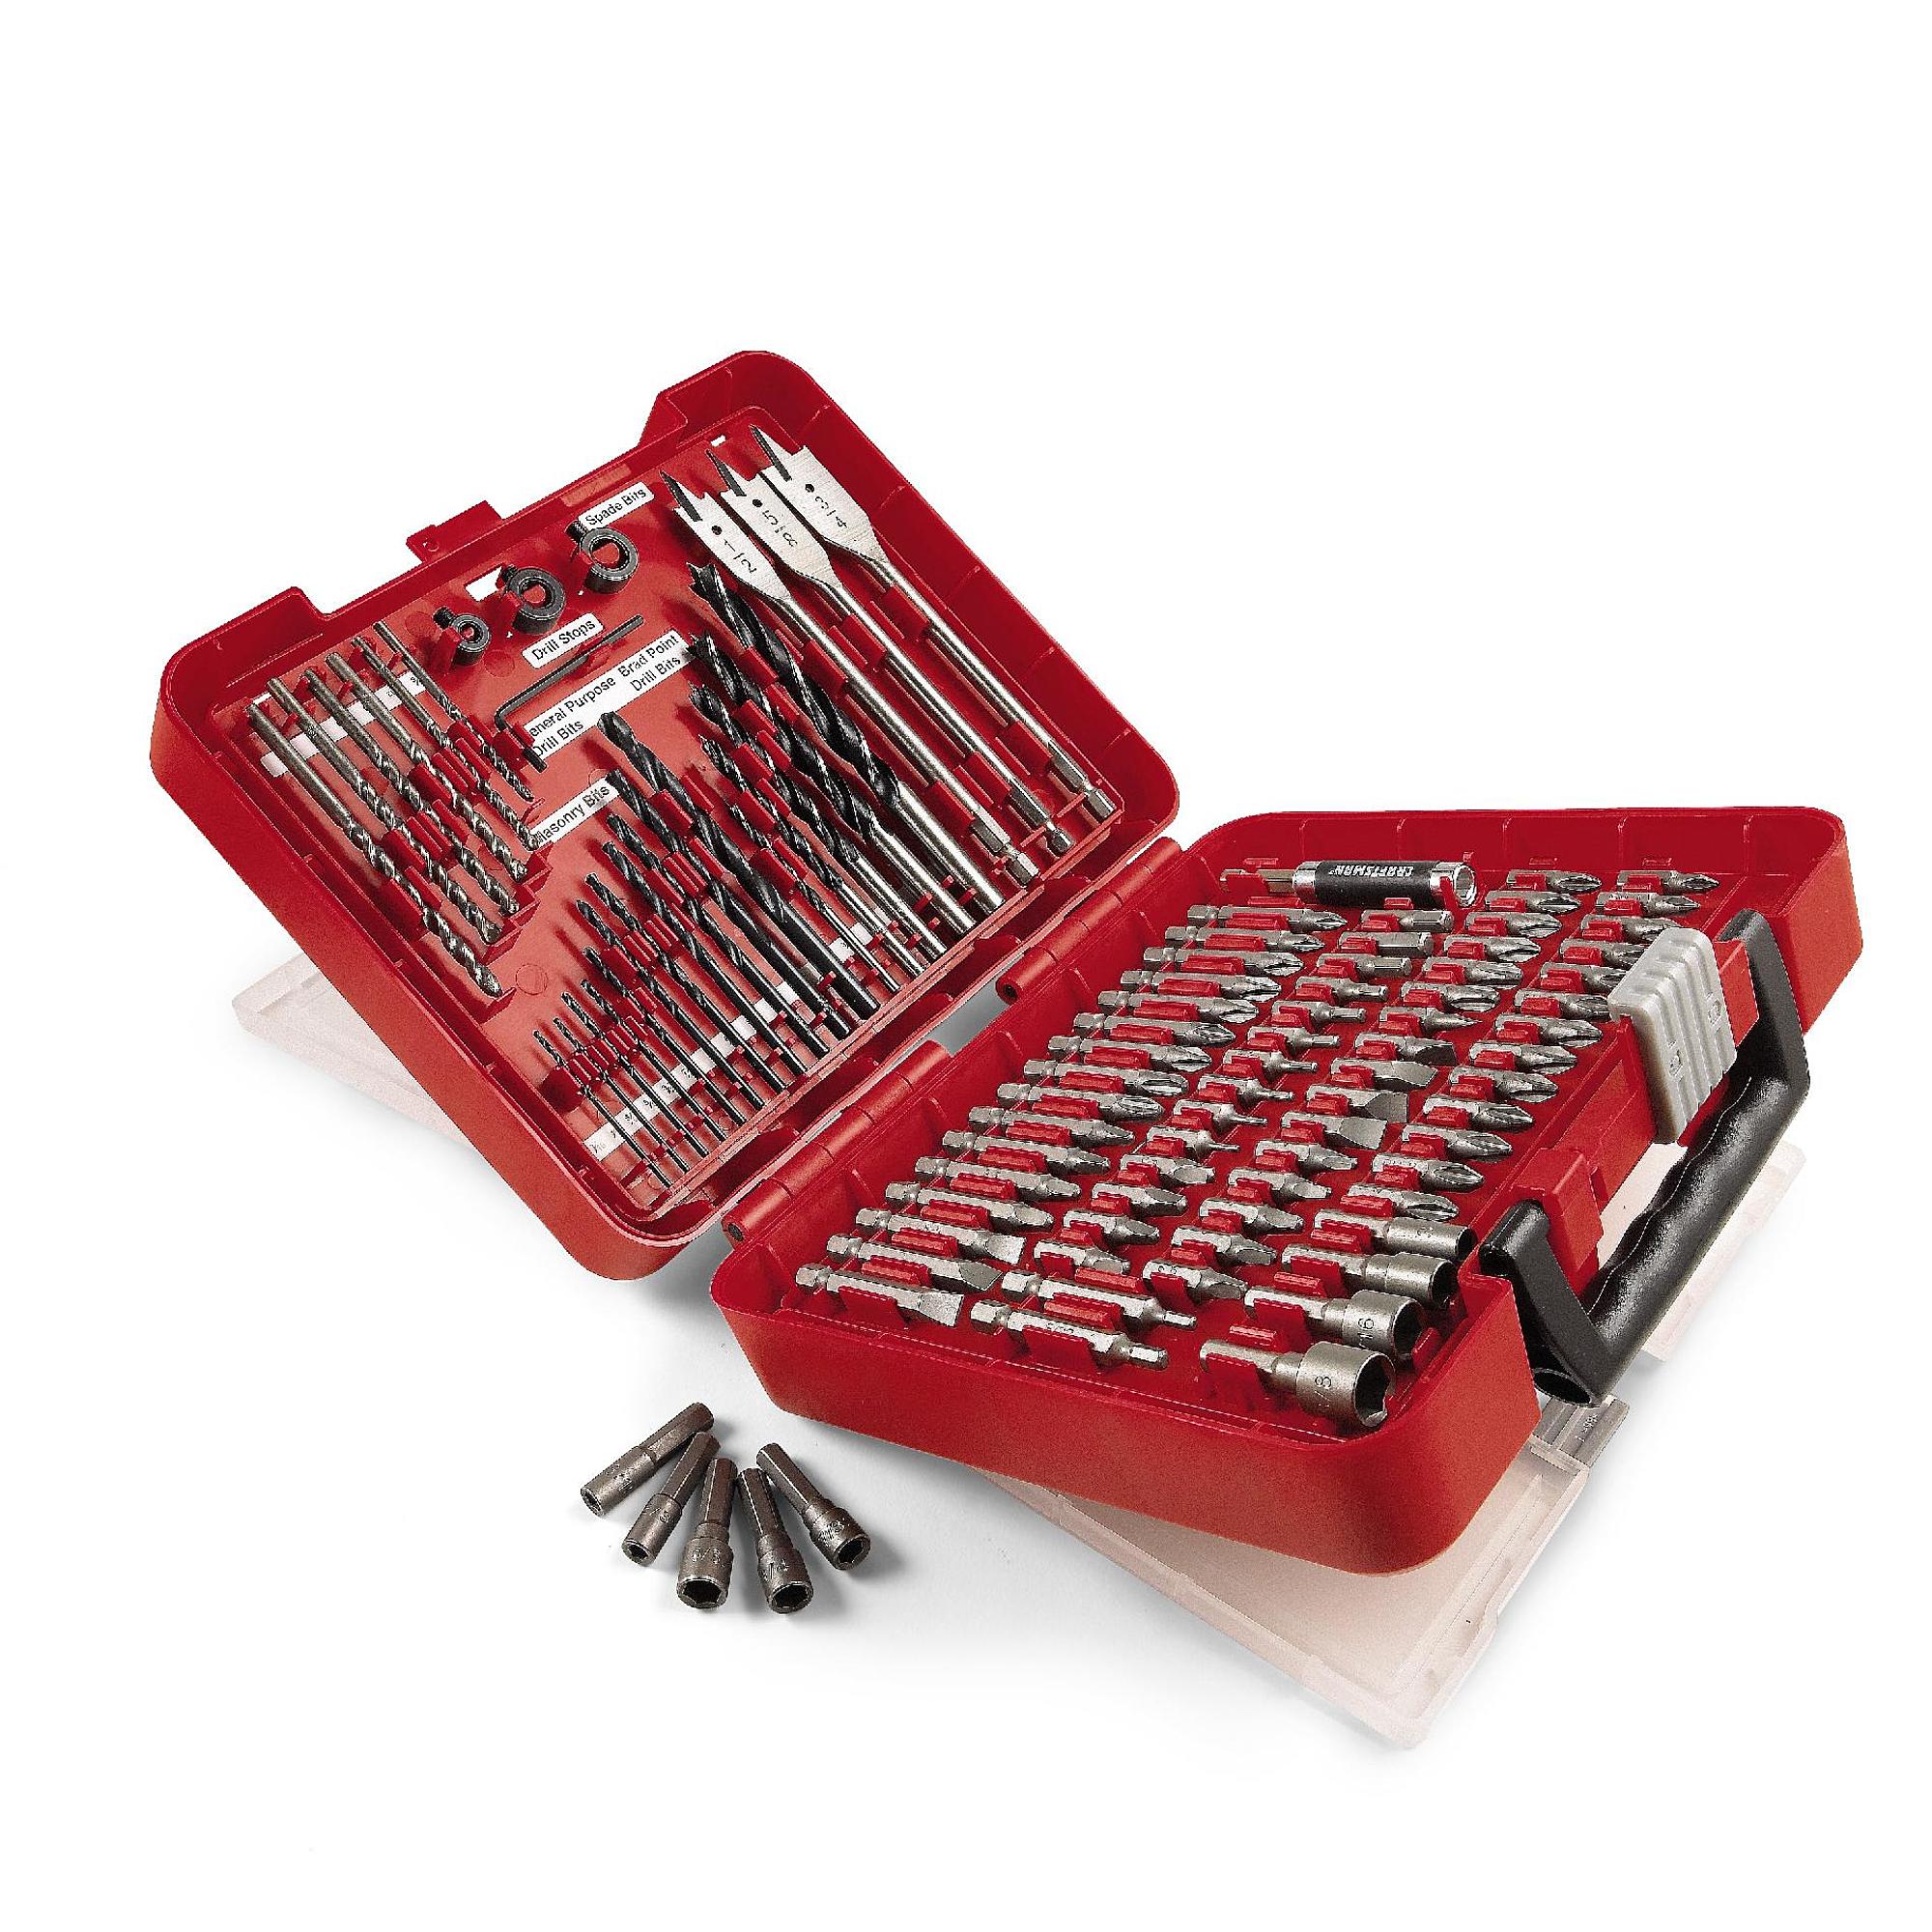 100-piece Craftsman drill bit accessory kit for $13